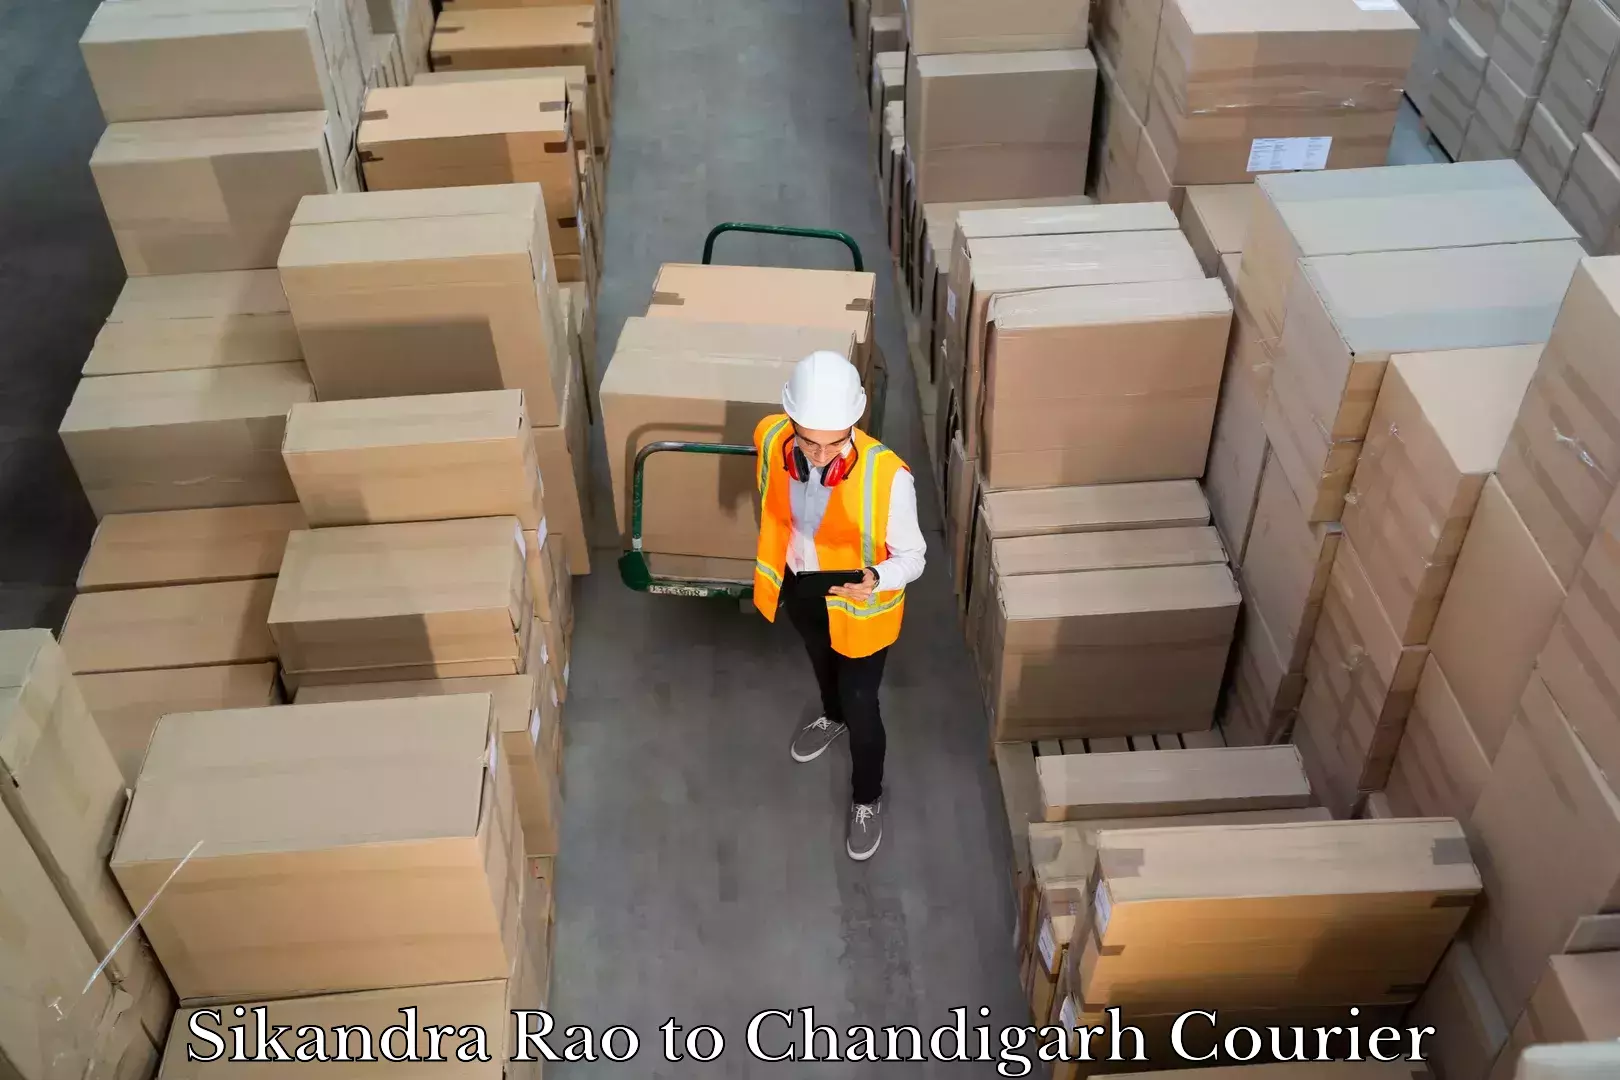 Personal effects shipping in Sikandra Rao to Chandigarh